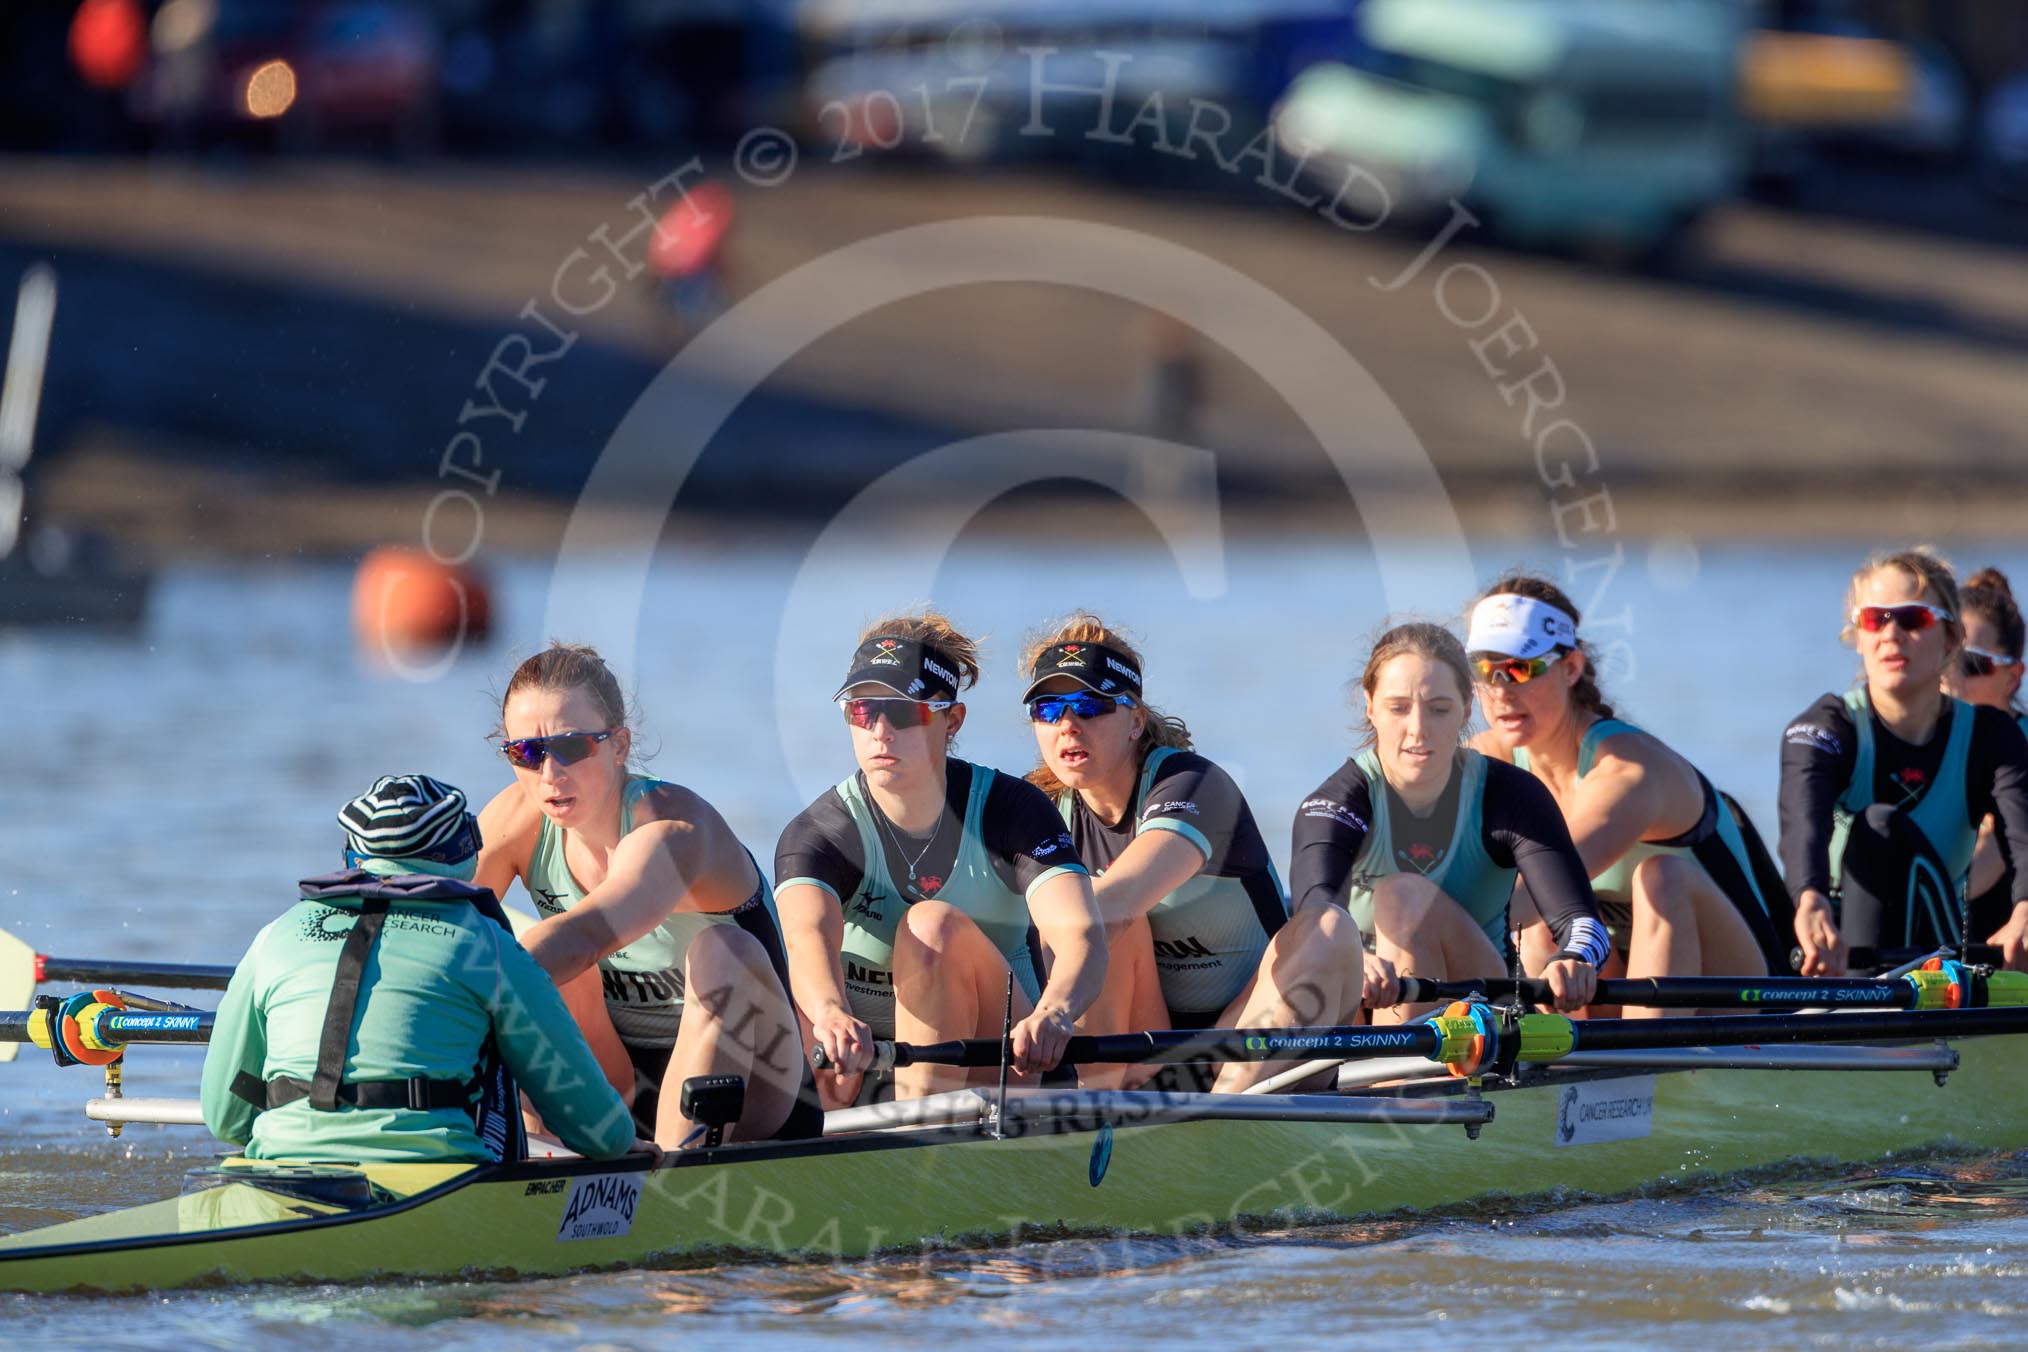 The Women's Boat Race season 2018 - fixture CUWBC vs. ULBC: The race has been started - OUWBC with  cox Sophie Shapter, stroke Tricia Smith, 7 Imogen Grant, 6 Anne Beenken, 5 Thea Zabell, 4 Paula Wesselmann, 3 Alice White, 2 Myriam Goudet-Boukhatmi.
River Thames between Putney Bridge and Mortlake,
London SW15,

United Kingdom,
on 17 February 2018 at 13:09, image #48